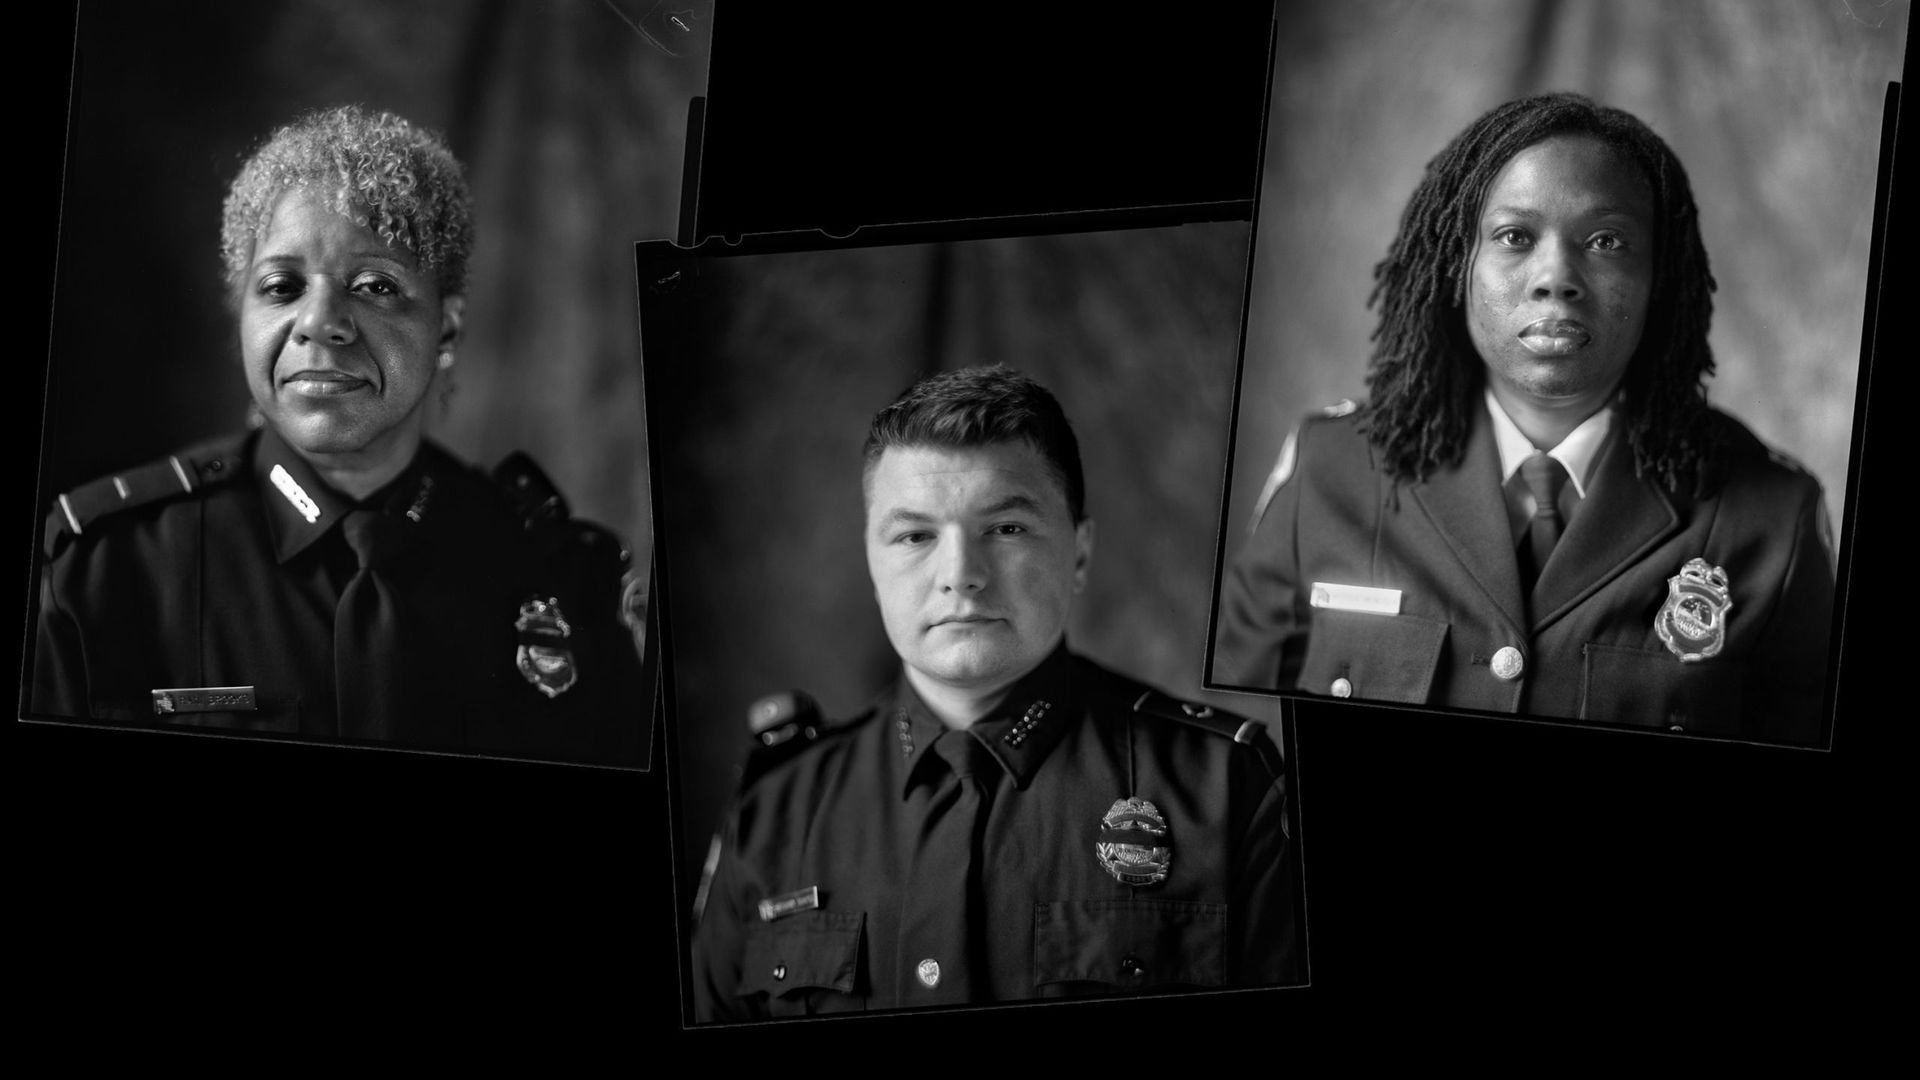 Black and white photos of Capitol Police officers in uniform